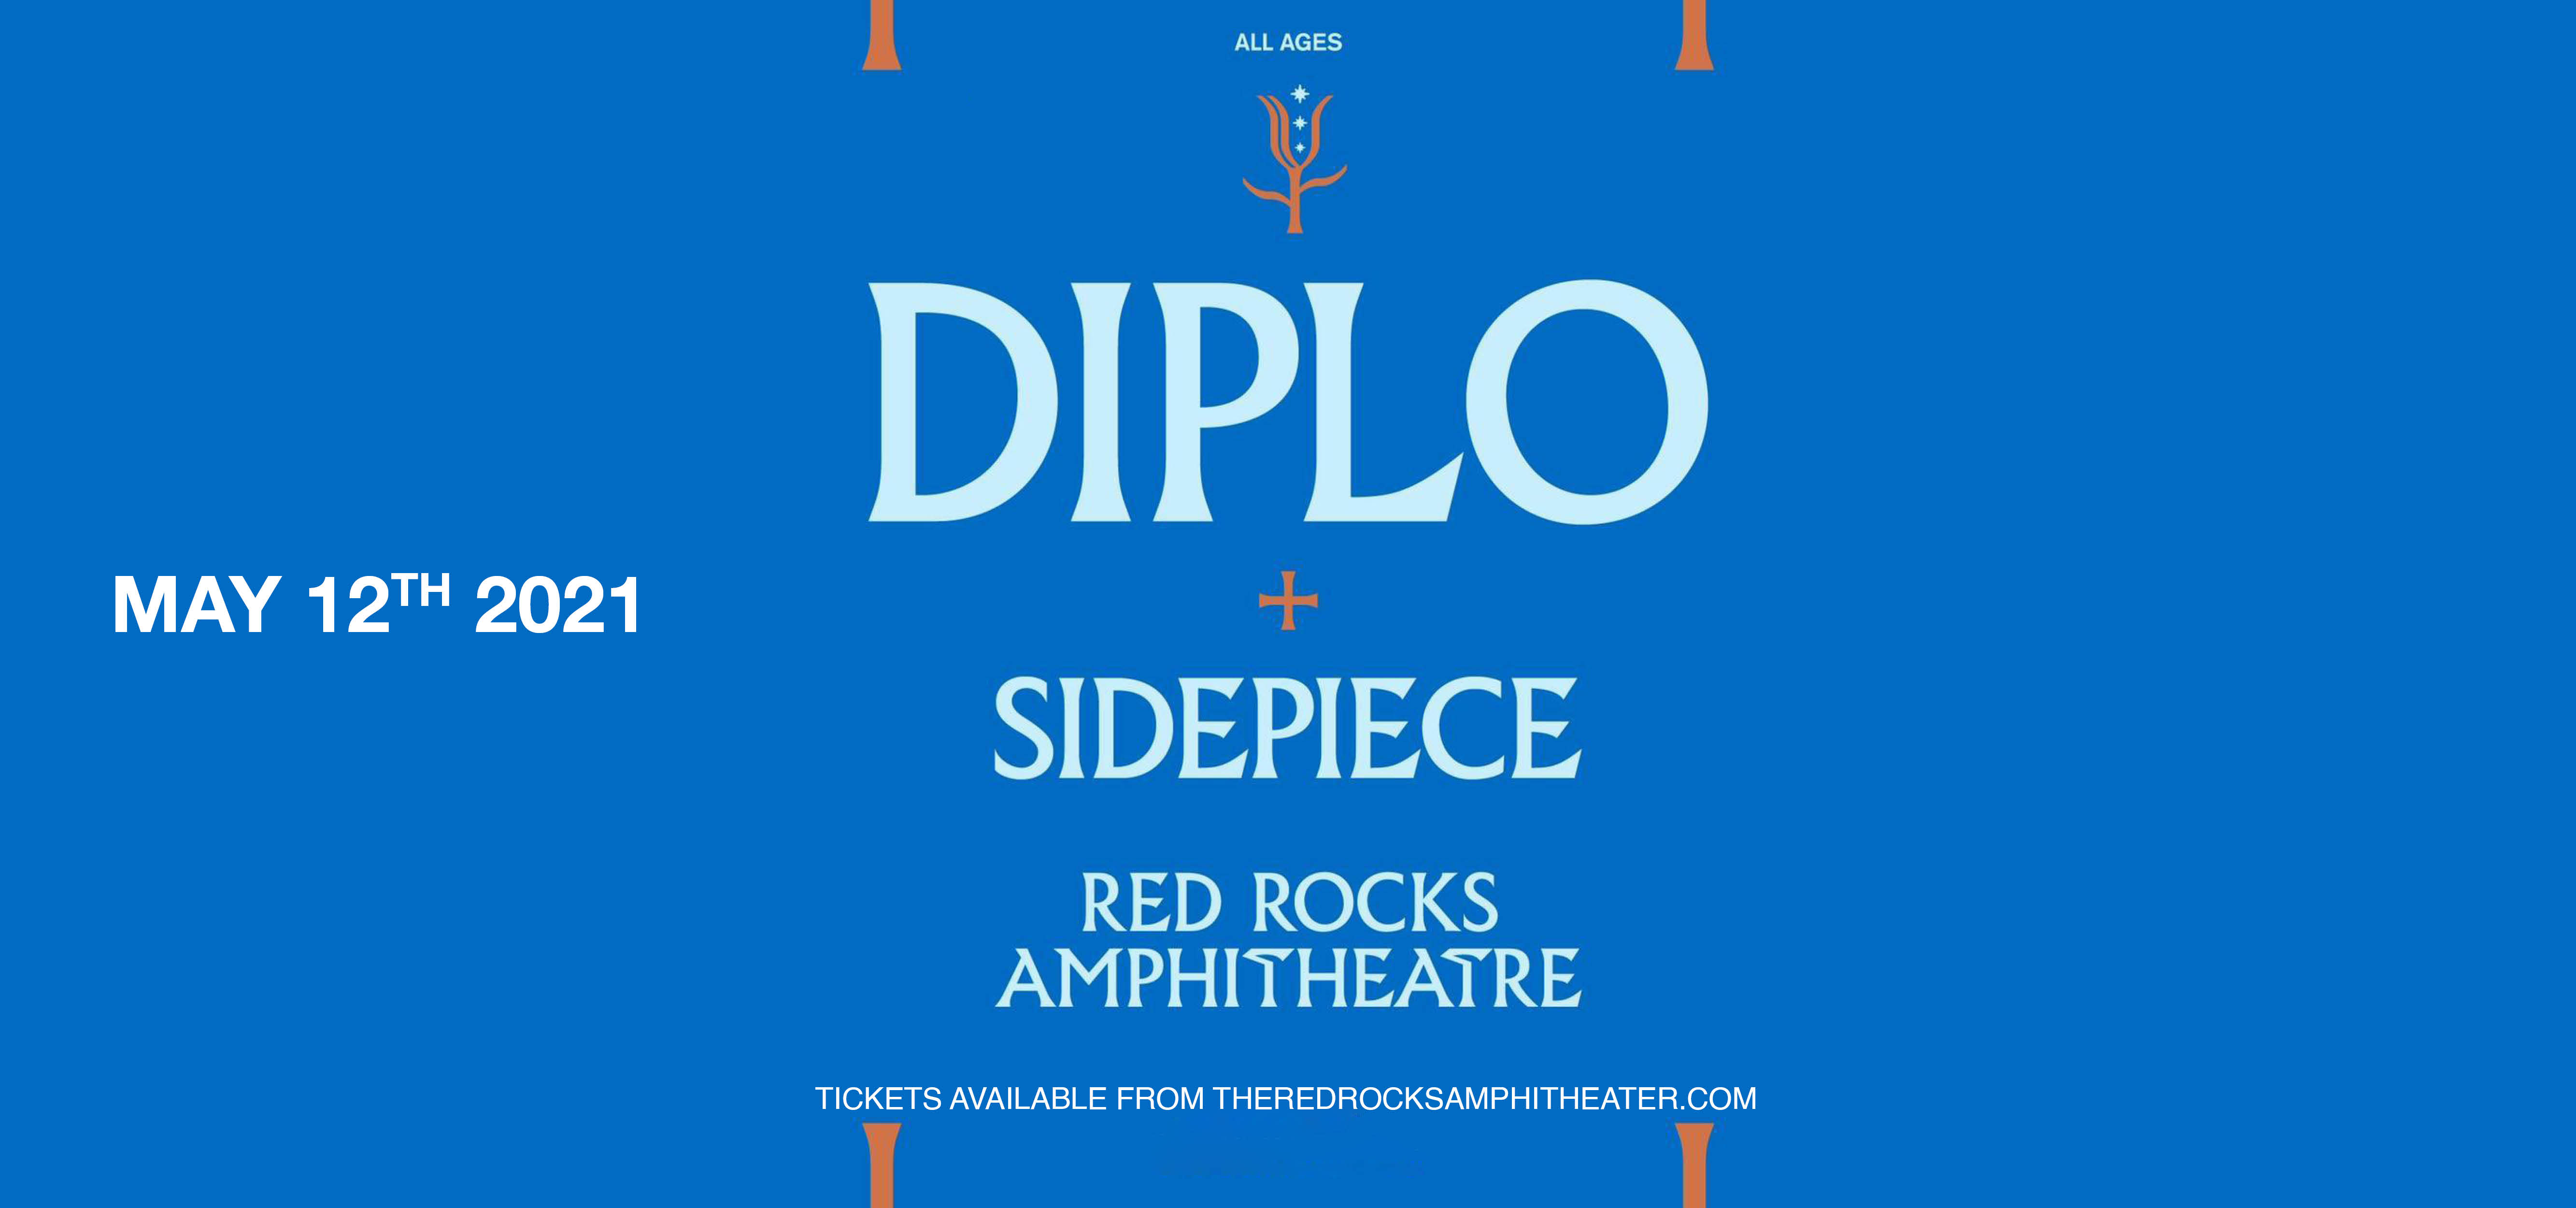 Diplo with Sidepiece at Red Rocks Amphitheater